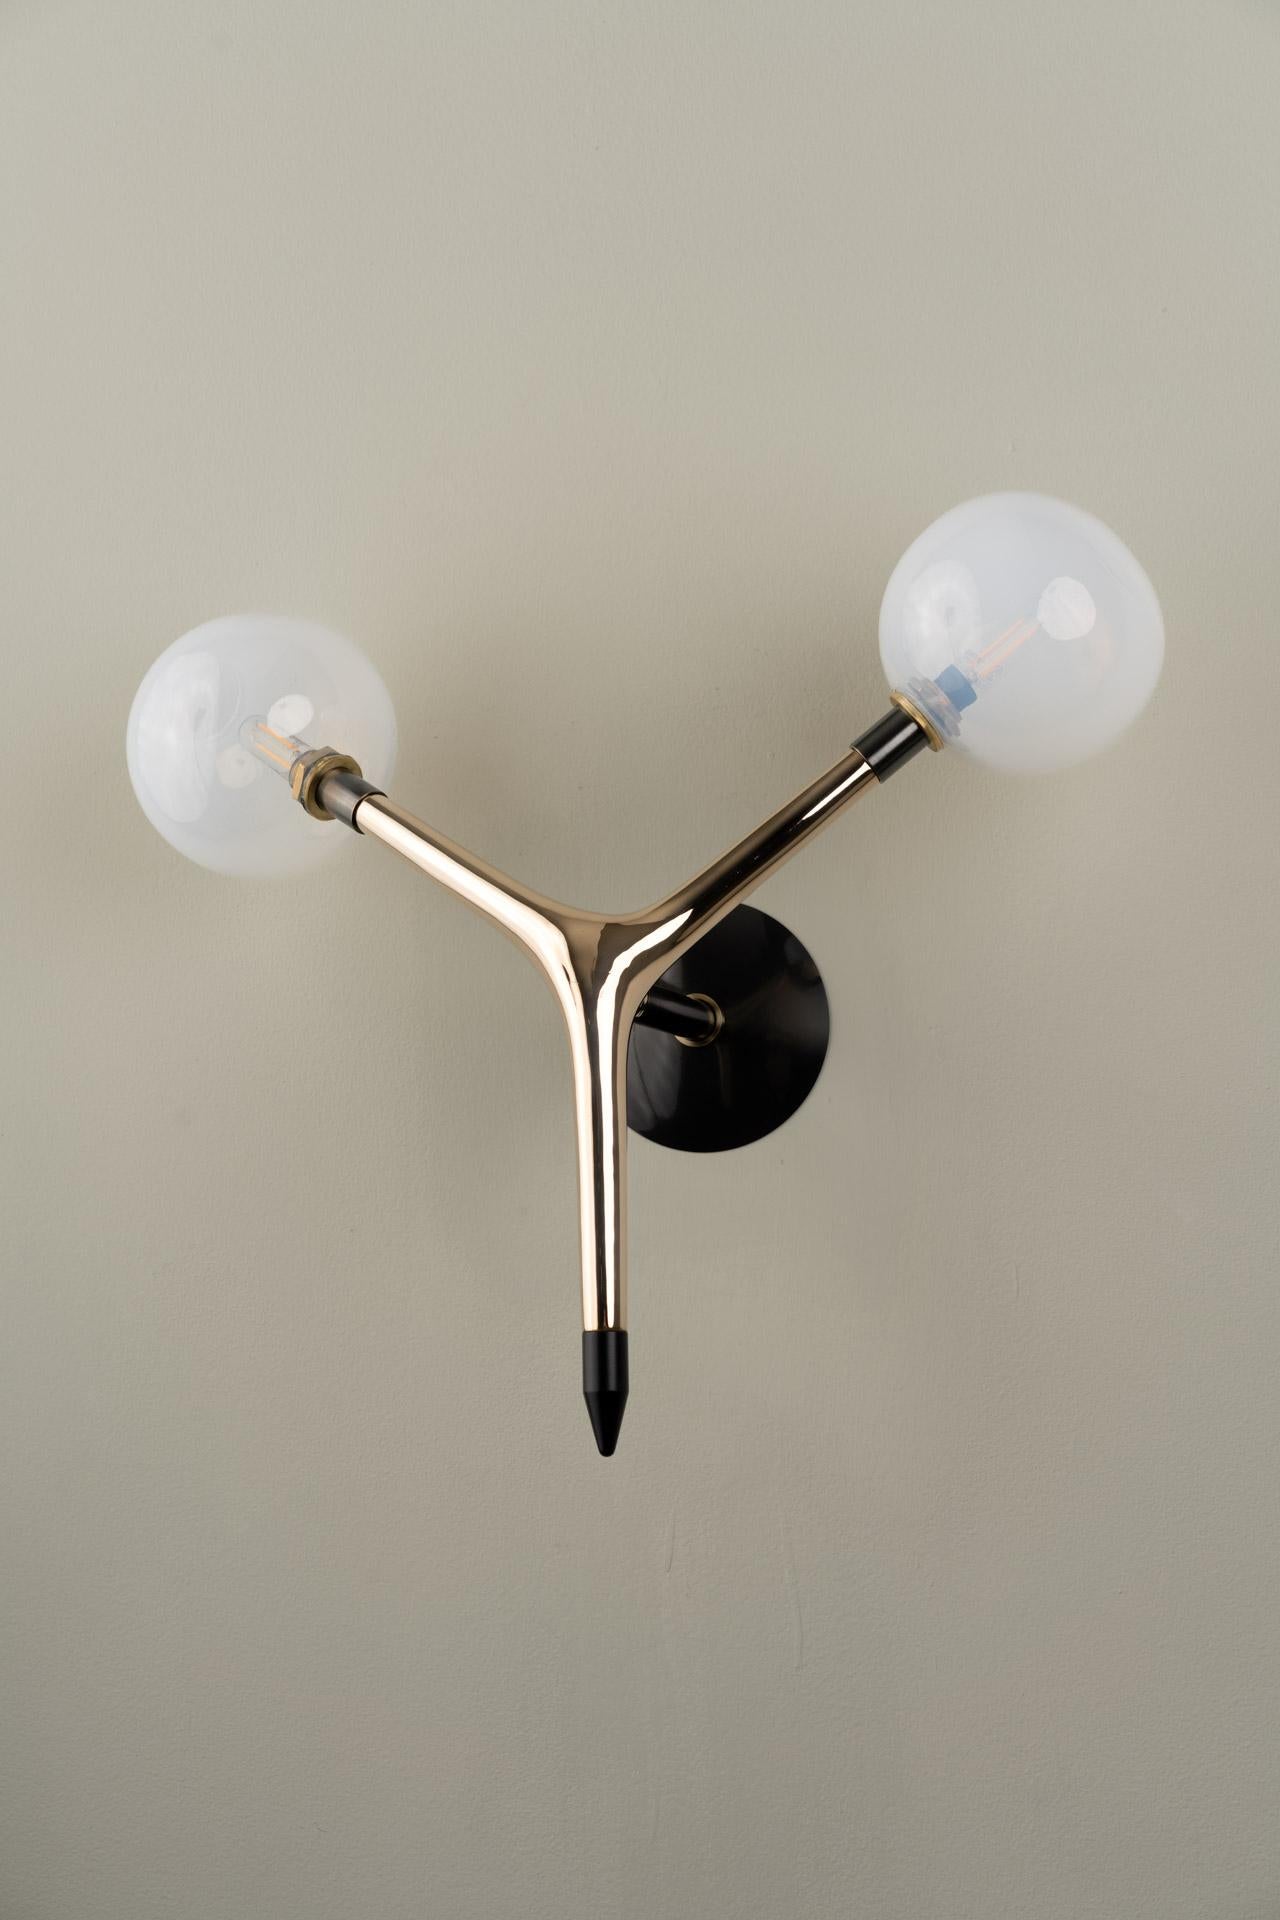 OJOS sconce was designed for the Mol collection by Mexican artist Isabel Moncada.

Eyes that glow to be seen. This sconce is the perfect solution for any wall. It uses a low-watt LED light that lasts up to 18 years and saves 90% of energy